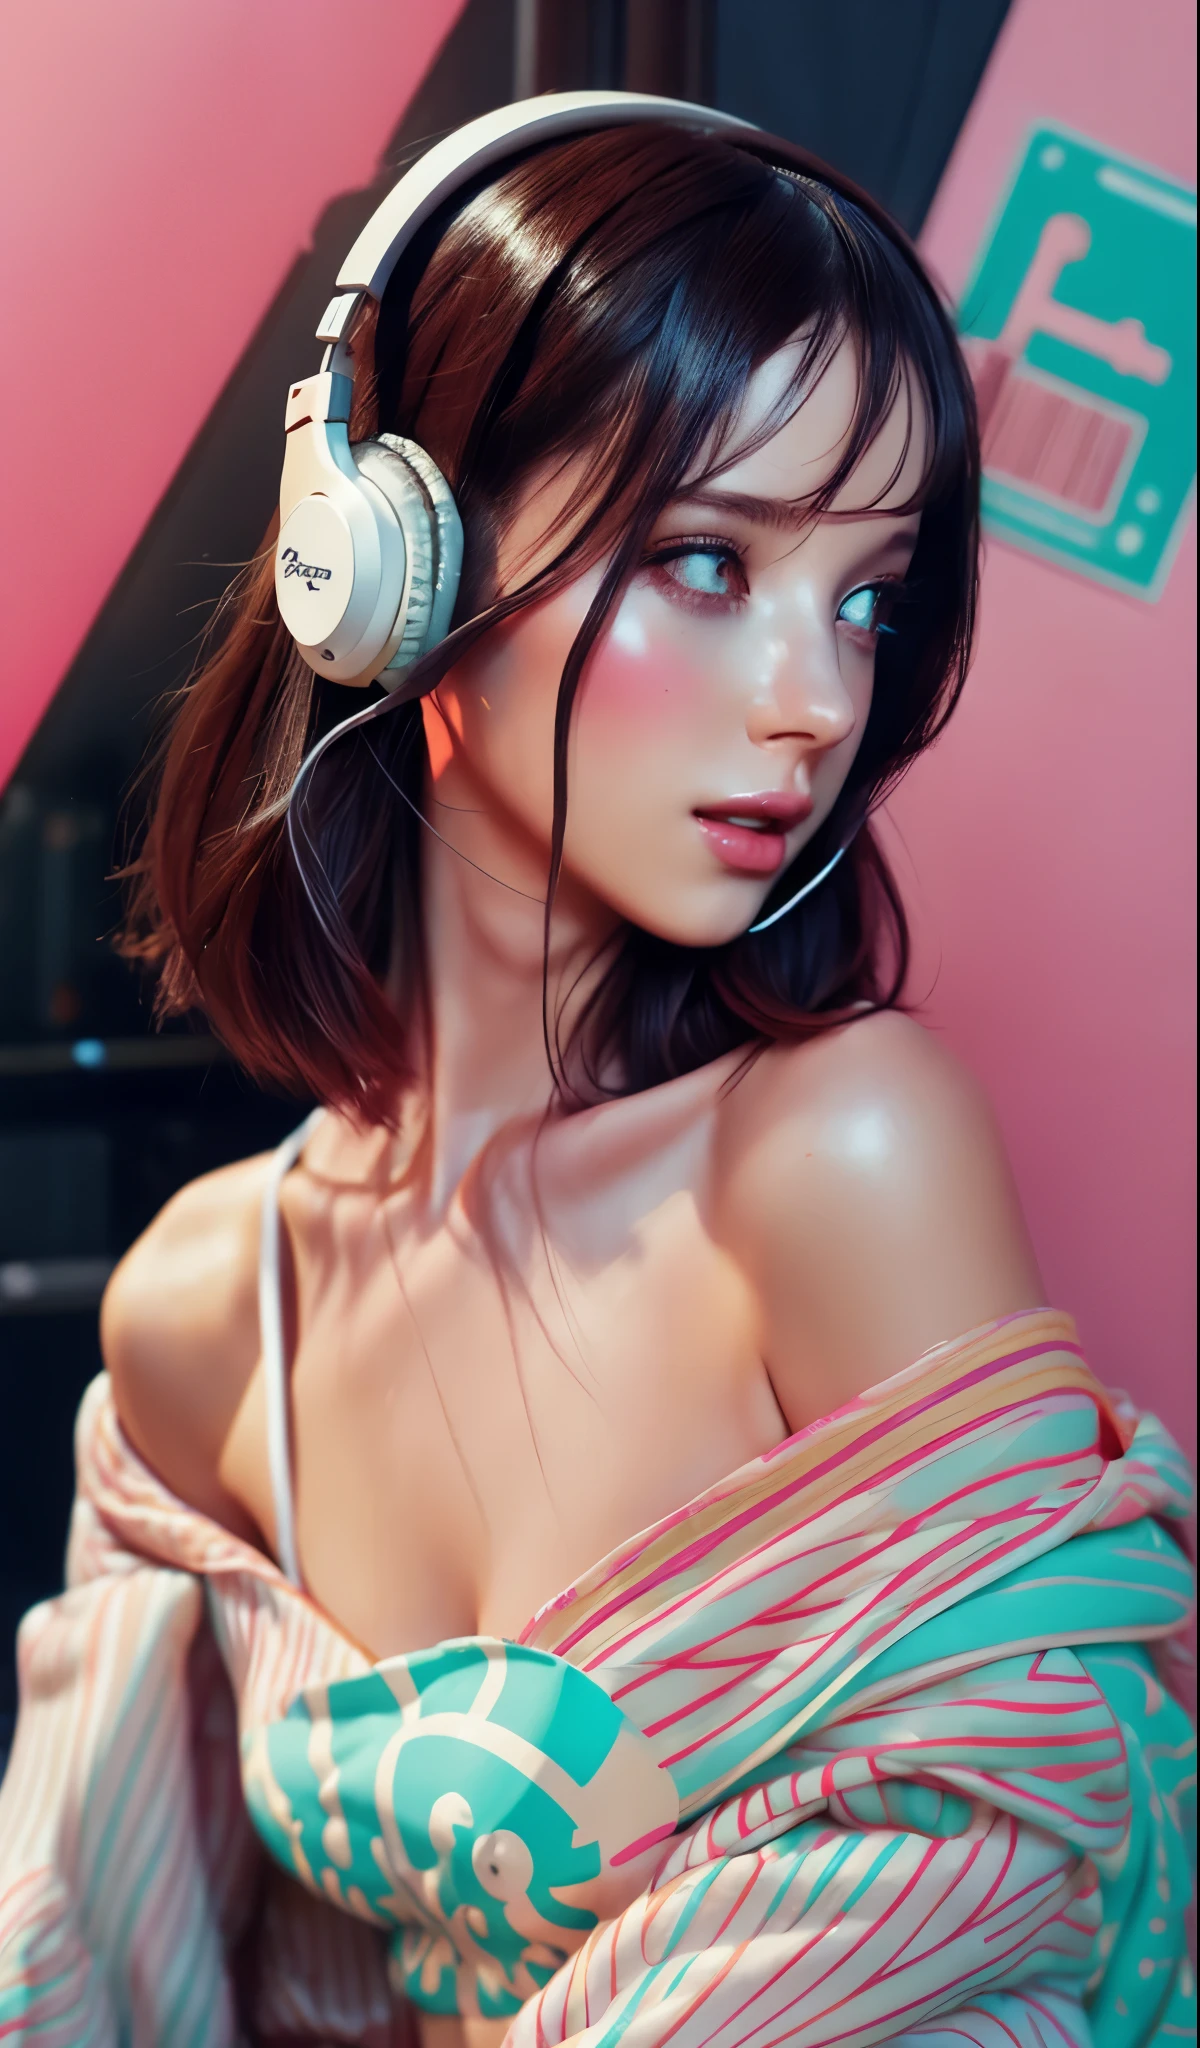 model girl wearing headphones, city background, intricate details, aesthetically pleasing pastel colors, poster background, art by conrad roset and ilya kuvshinov